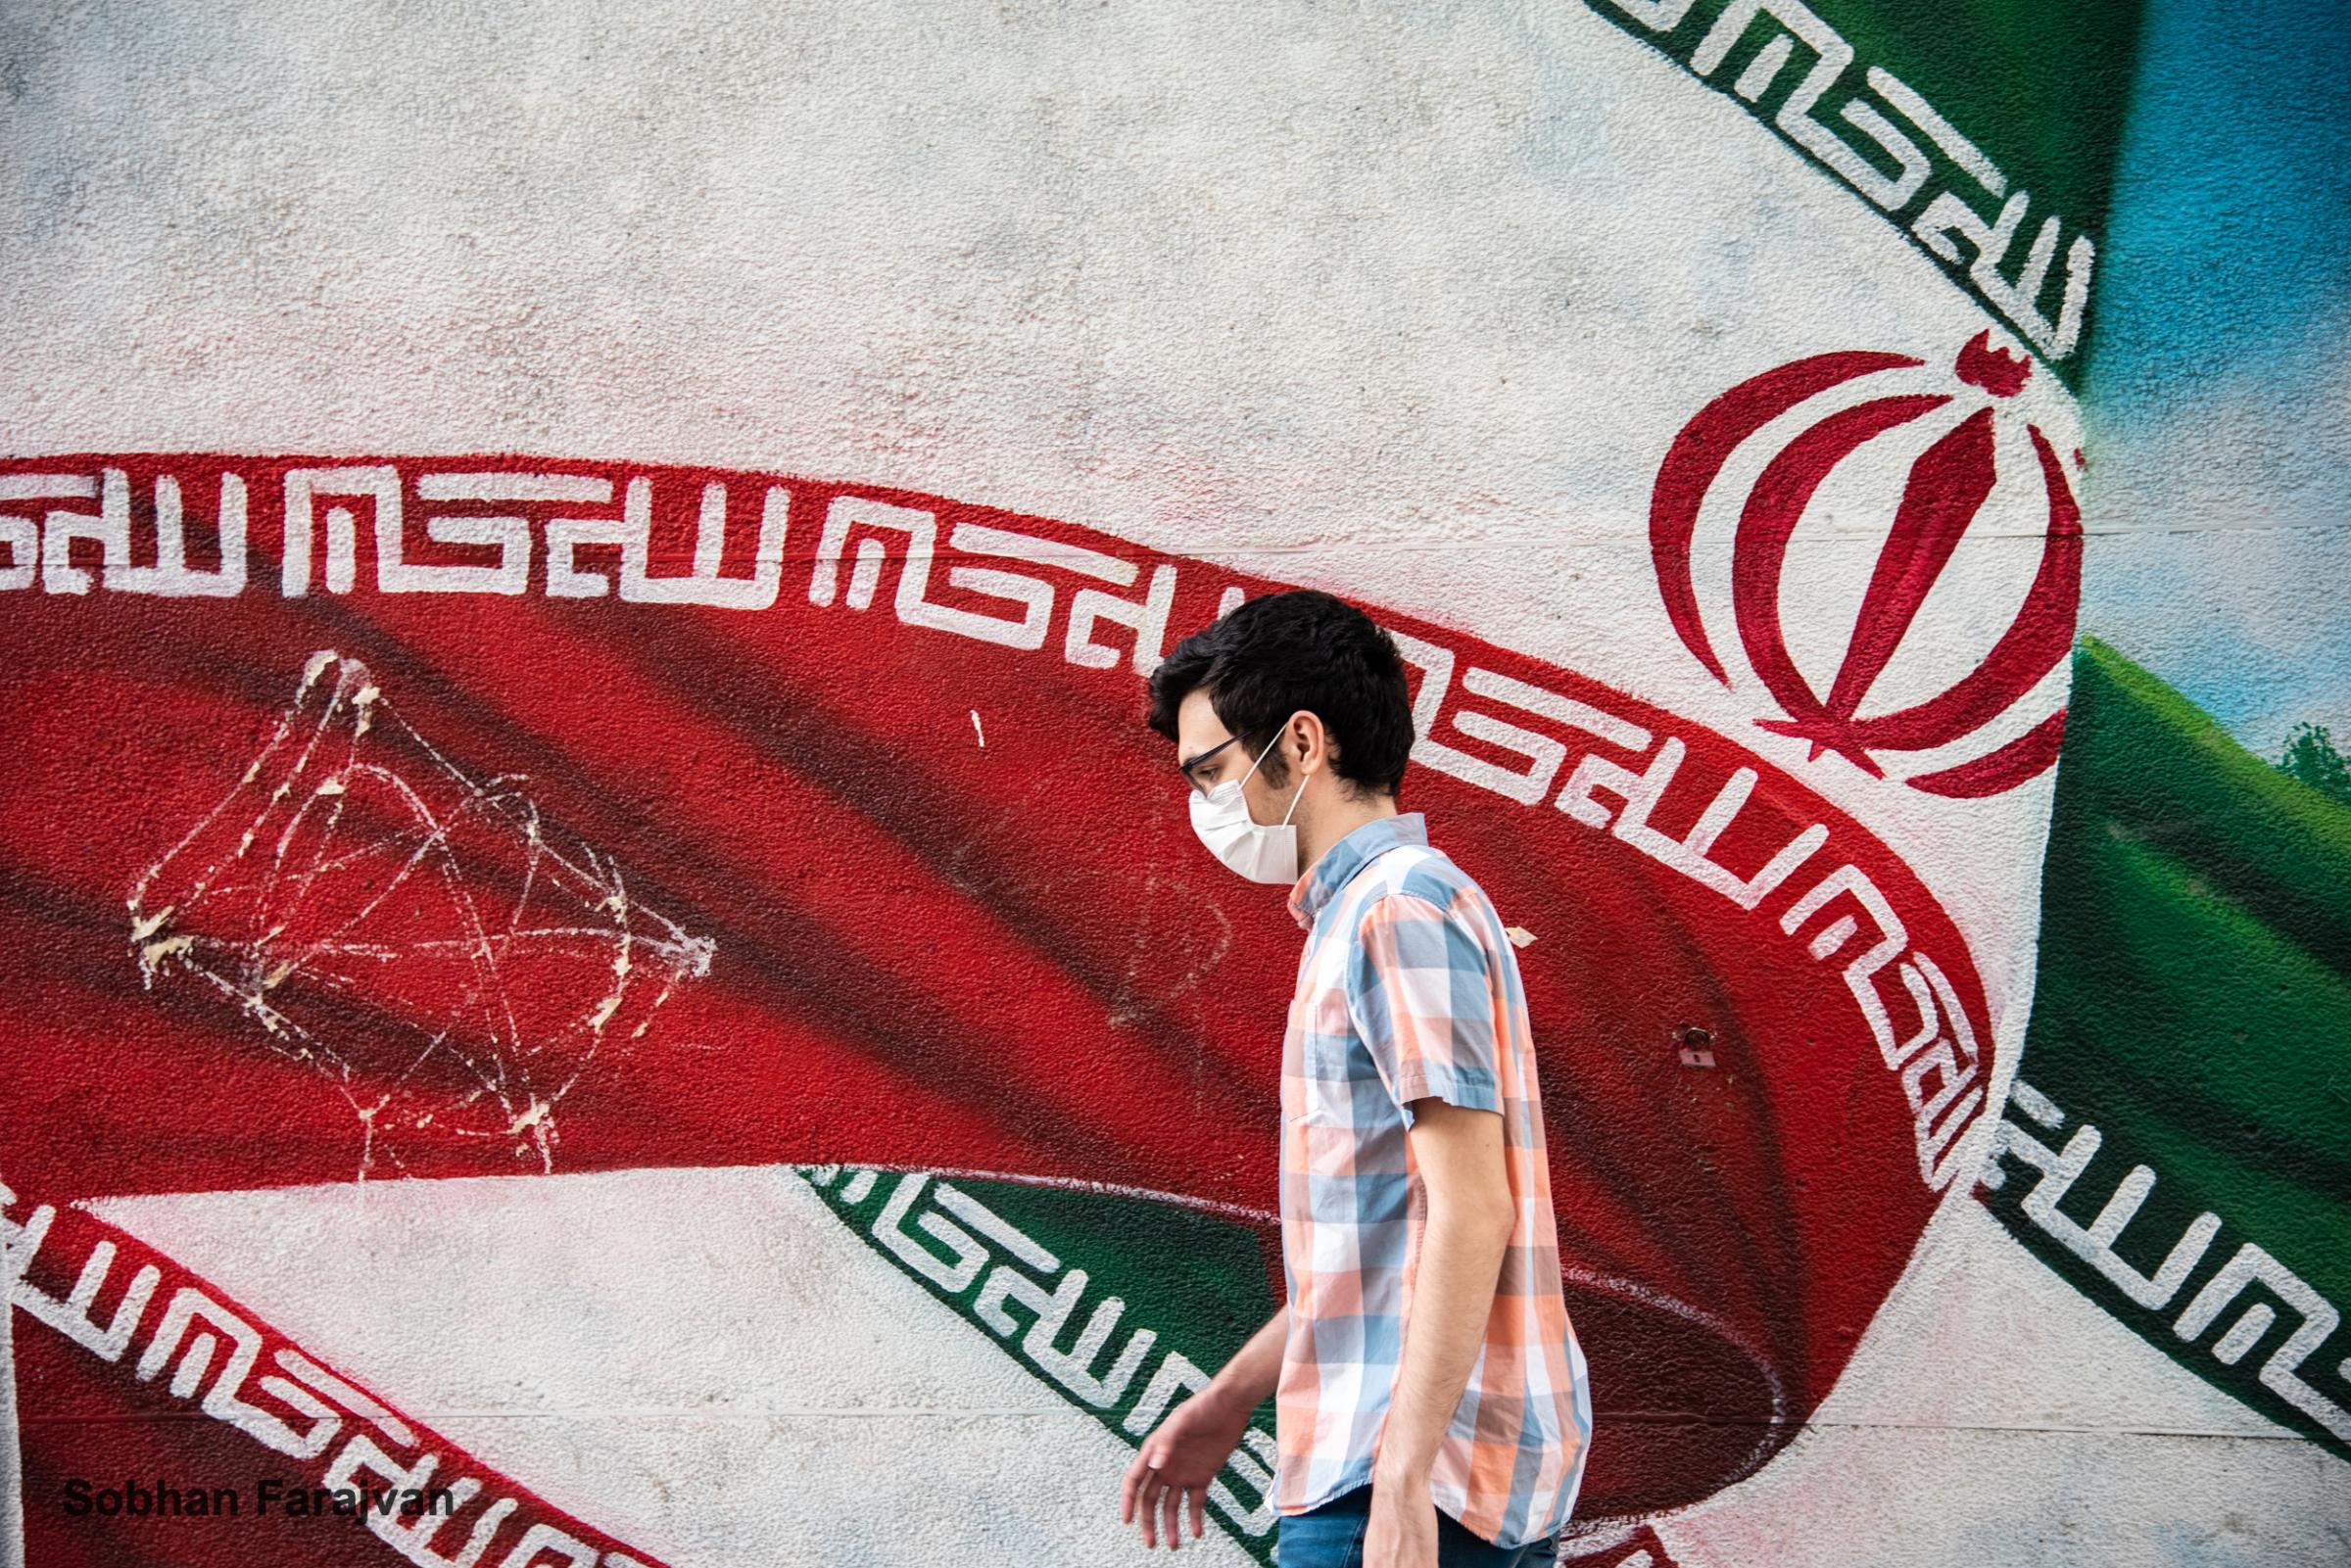 COVID-19 pandemic in Iran (2020-2022) - a young man wearing a protective face mask walks past an...